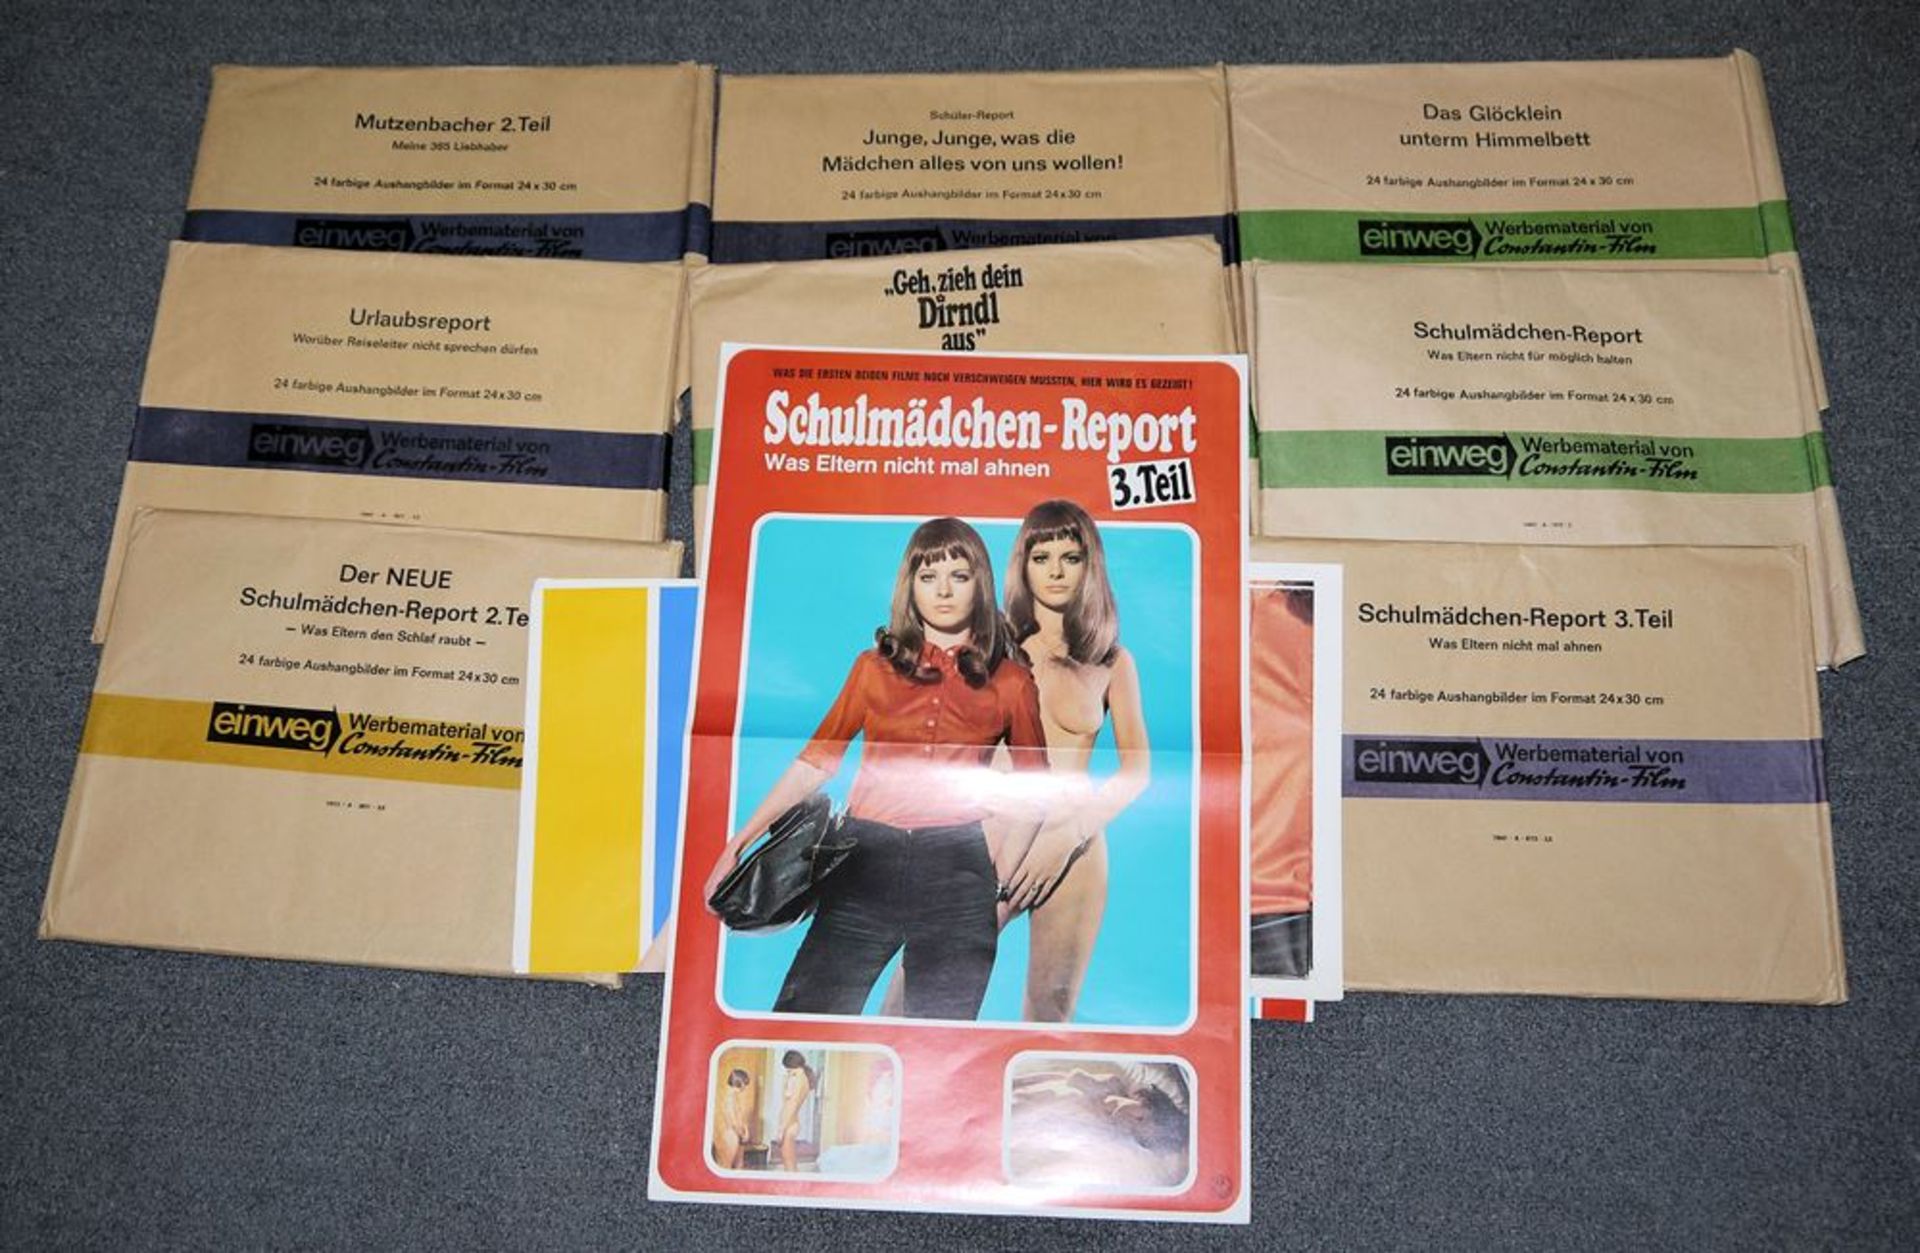 Constantin-Film advertising material für sex films of the 1970s, school mädchen report a.o.. From a